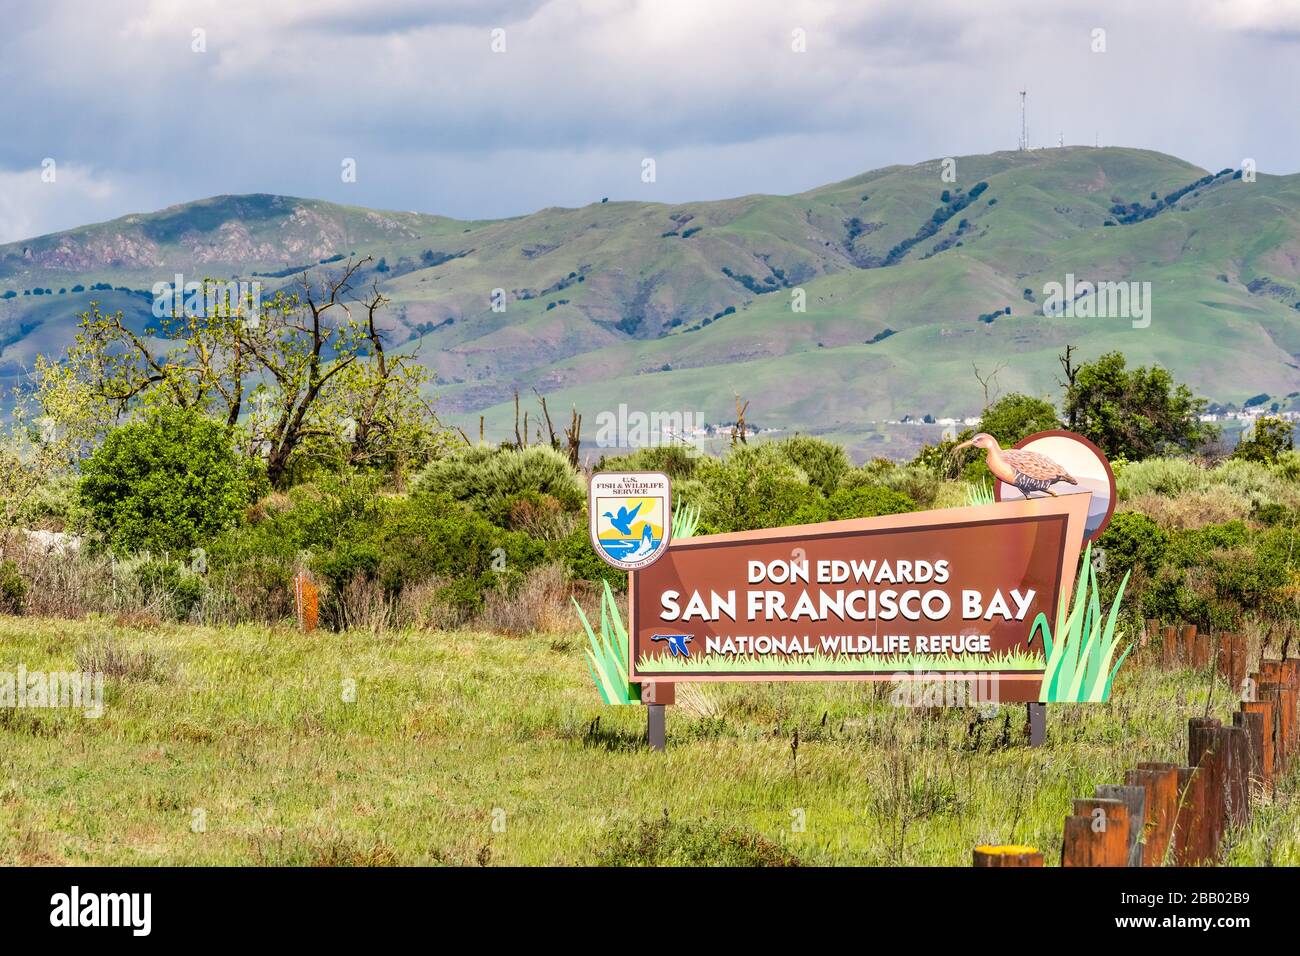 March 26, 2020 San Jose / CA / USA - Don Edwards San Francisco Bay National Wildlife Refuge sign displayed at the entrance; mountains visible in the b Stock Photo